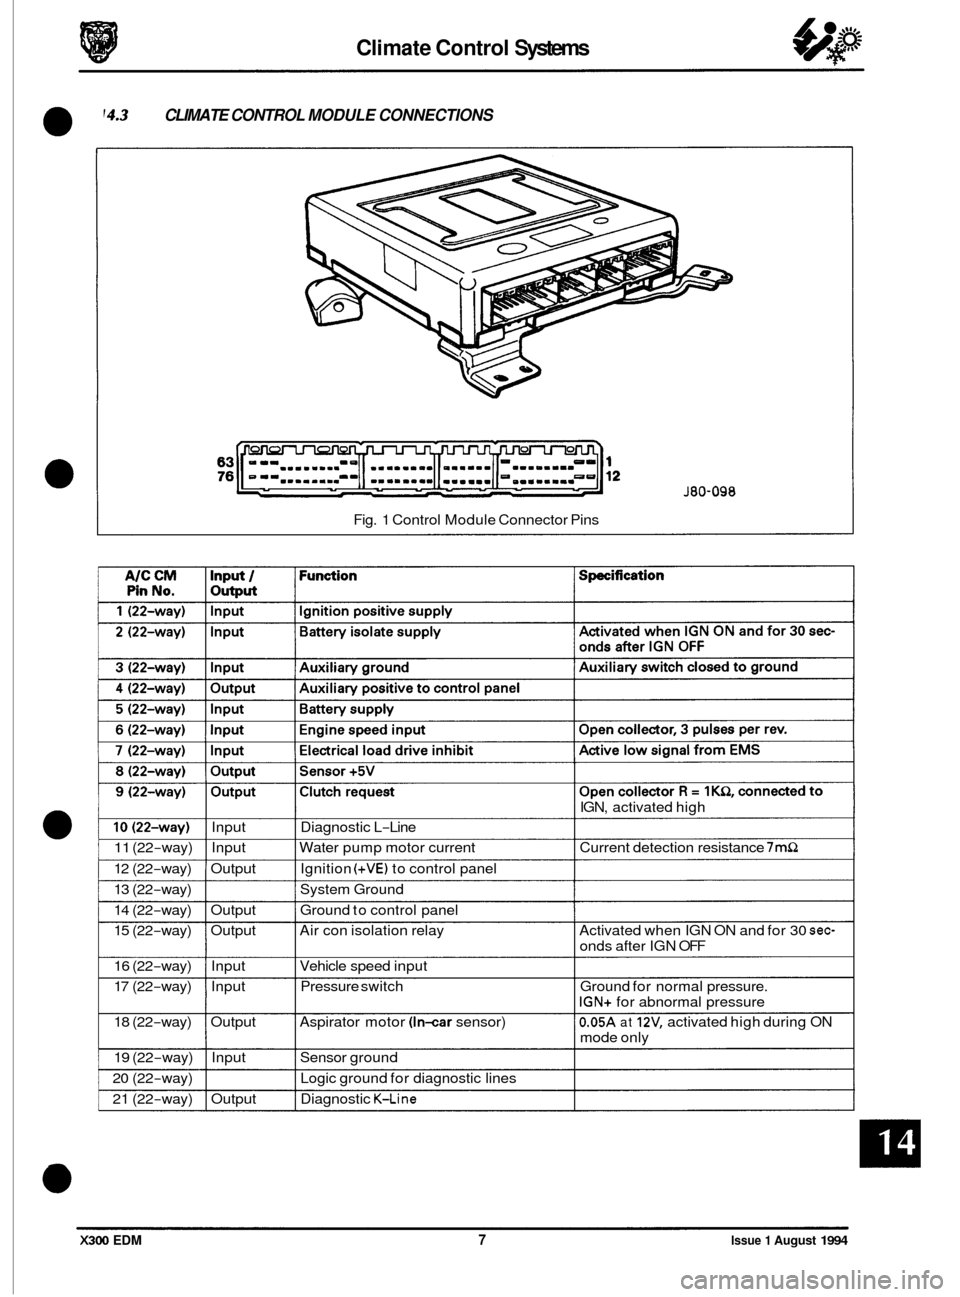 JAGUAR XJ6 1994 2.G Electrical Diagnostic Manual Climate Control Systems 
0 
0 
14.3 CLIMATE CONTROL  MODULE CONNECTIONS 
Fig. 1 Control  Module  Connector  Pins 
J80-098 
IGN, activated  high 
0 Io(22-way) Input  Diagnostic L-Line 
11 (22-way) Inpu